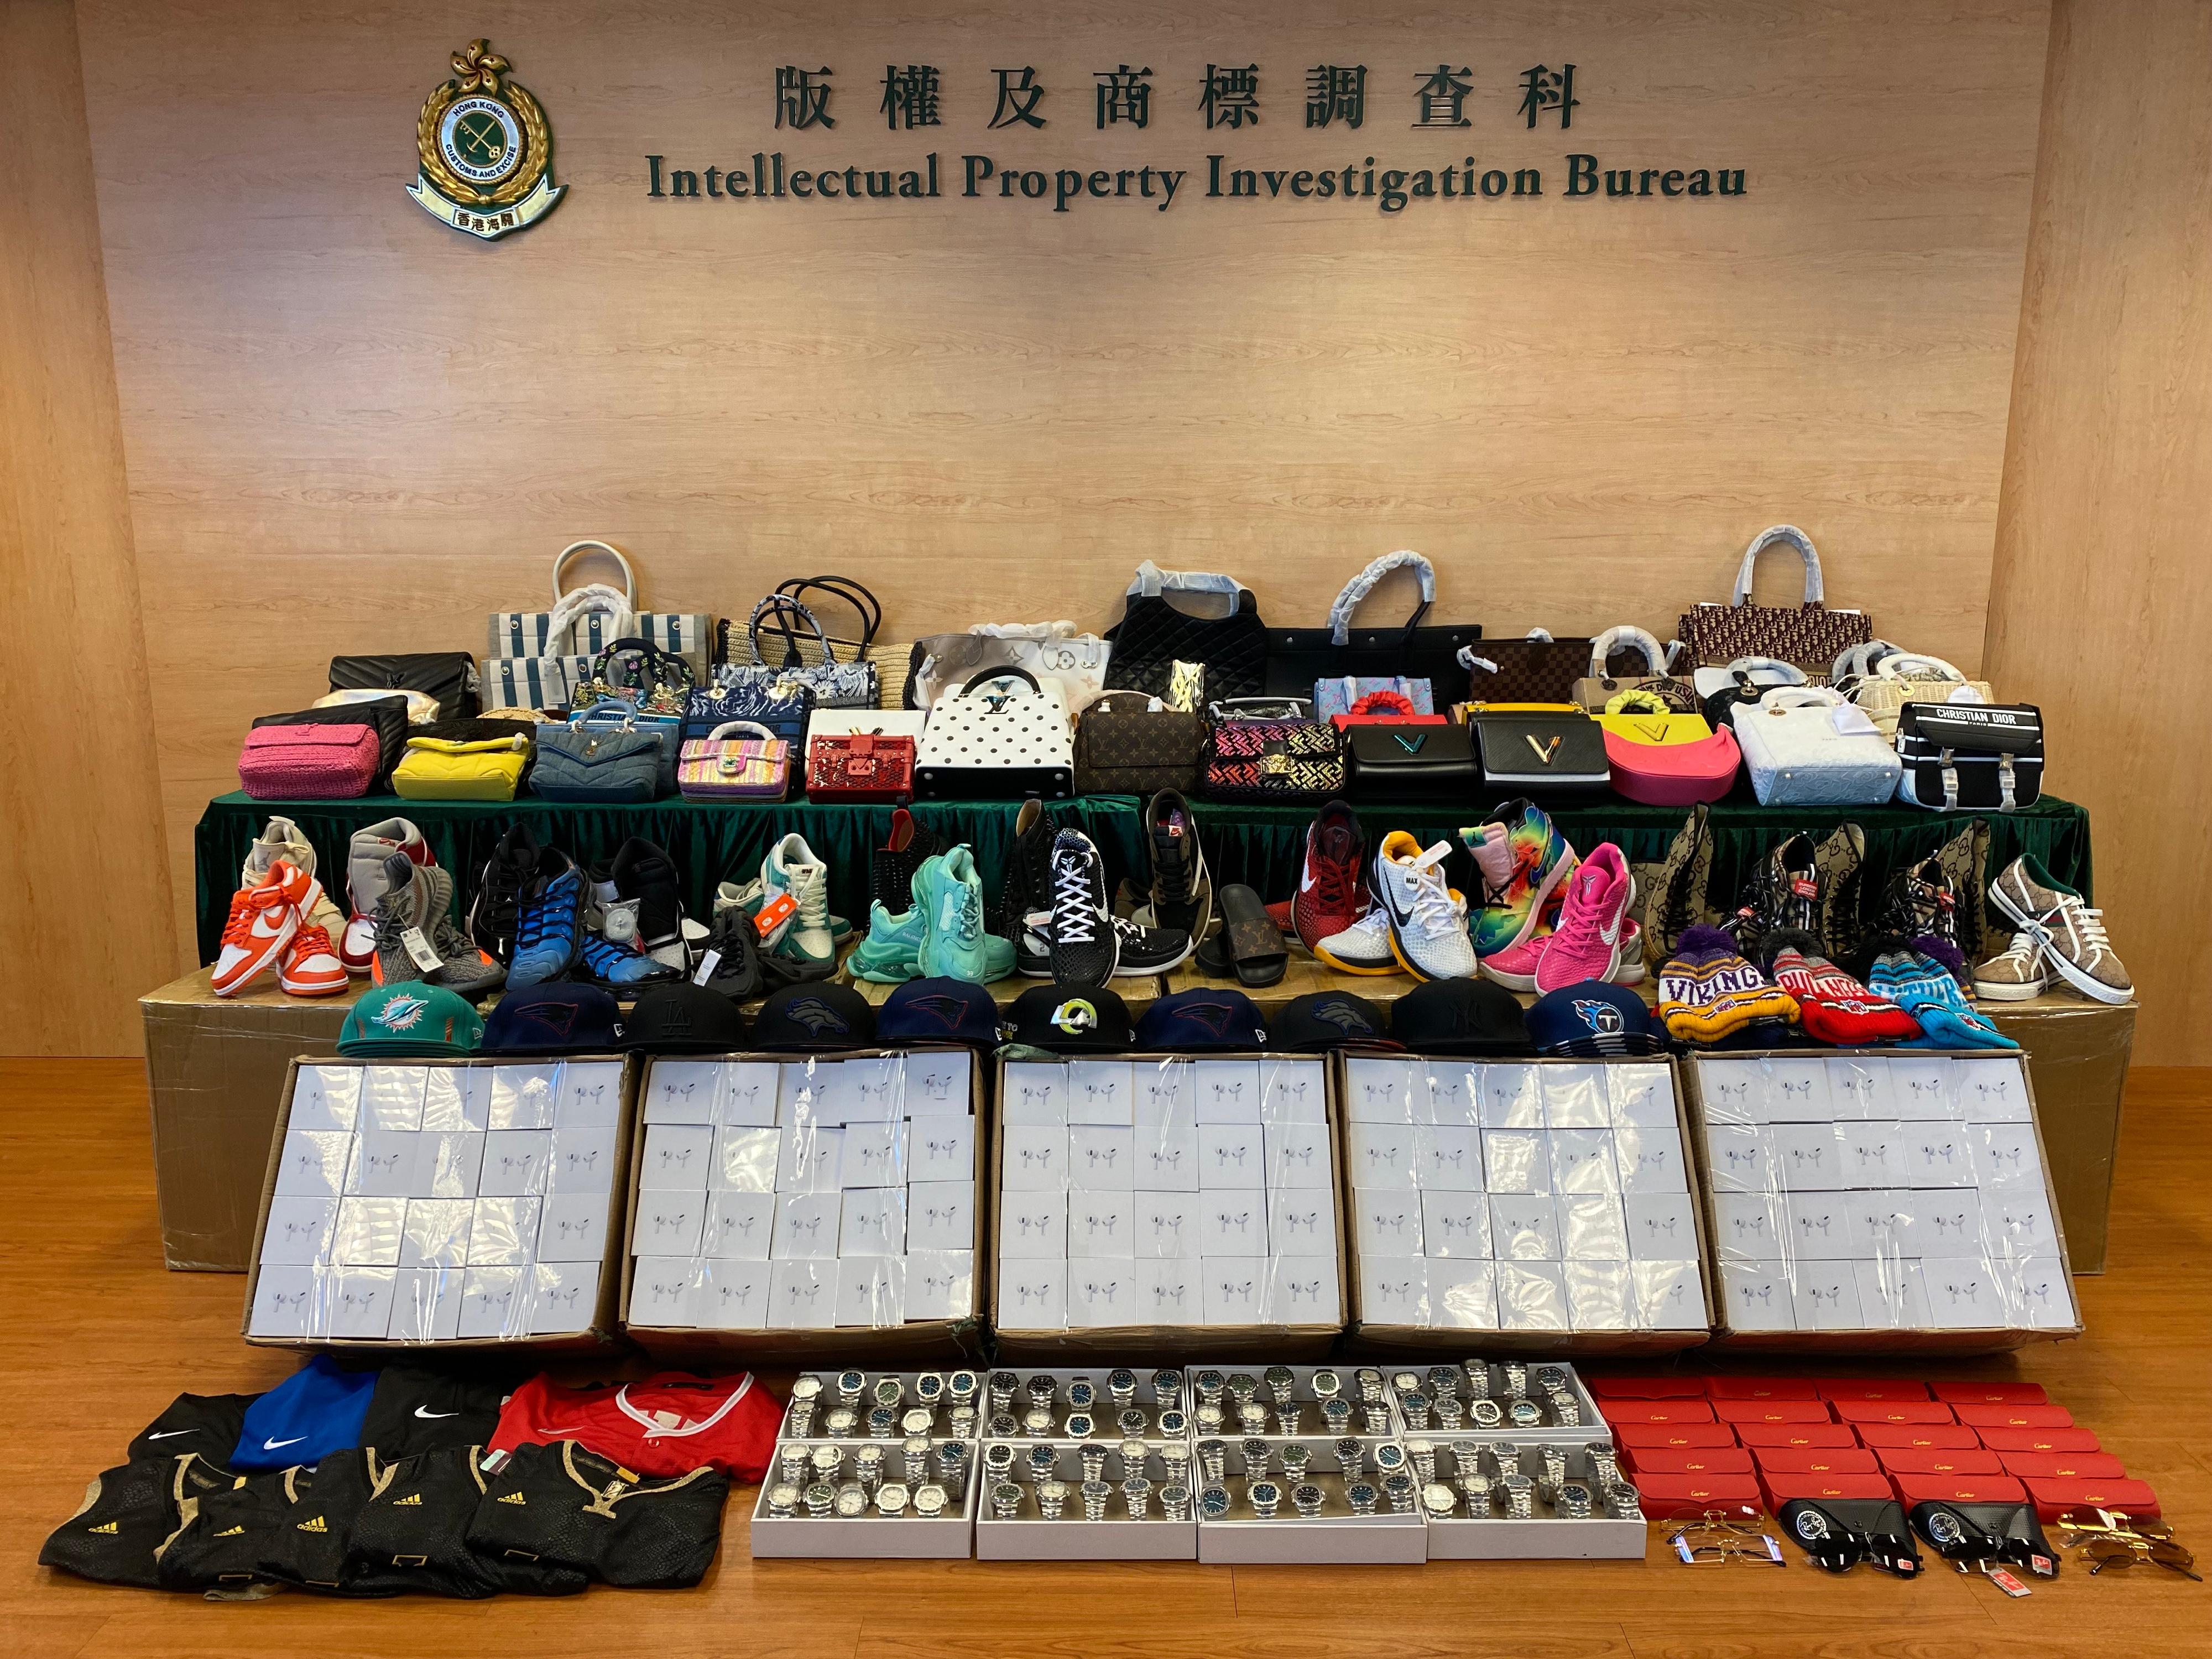 Hong Kong Customs seized about 2 800 items of suspected counterfeit goods with a total estimated market value of about $4.1 million at Man Kam To Control Point, Yuen Long and Kwai Chung from July 5 to 8. Photo shows some of the suspected counterfeit goods seized by Customs officers in Yuen Long and Kwai Chung.